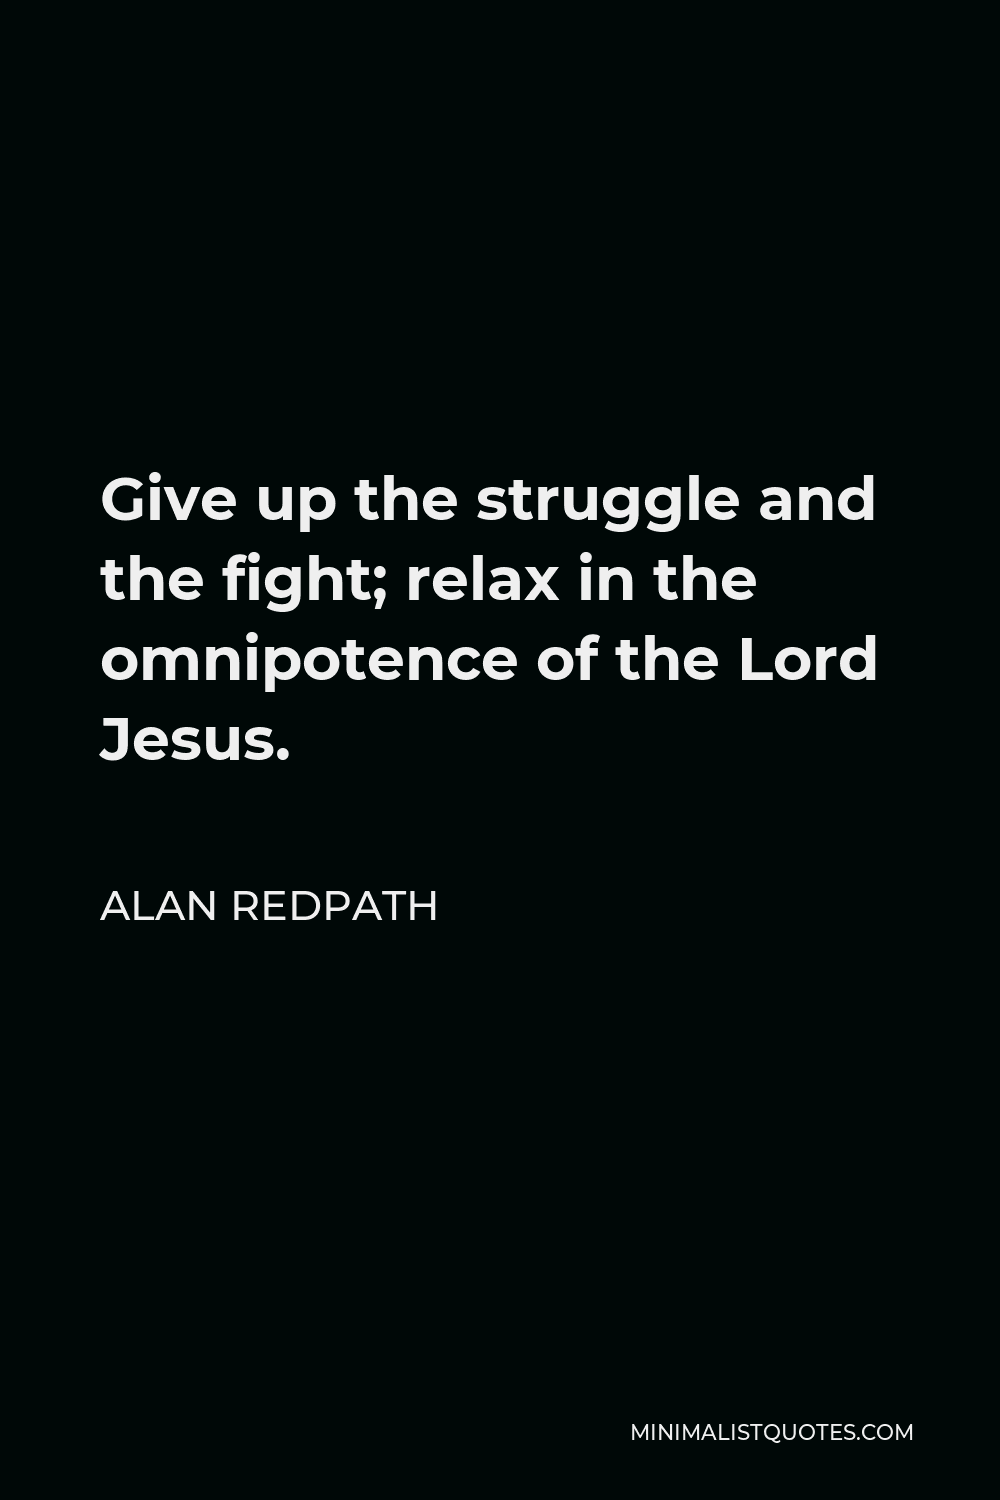 Alan Redpath Quote - Give up the struggle and the fight; relax in the omnipotence of the Lord Jesus.